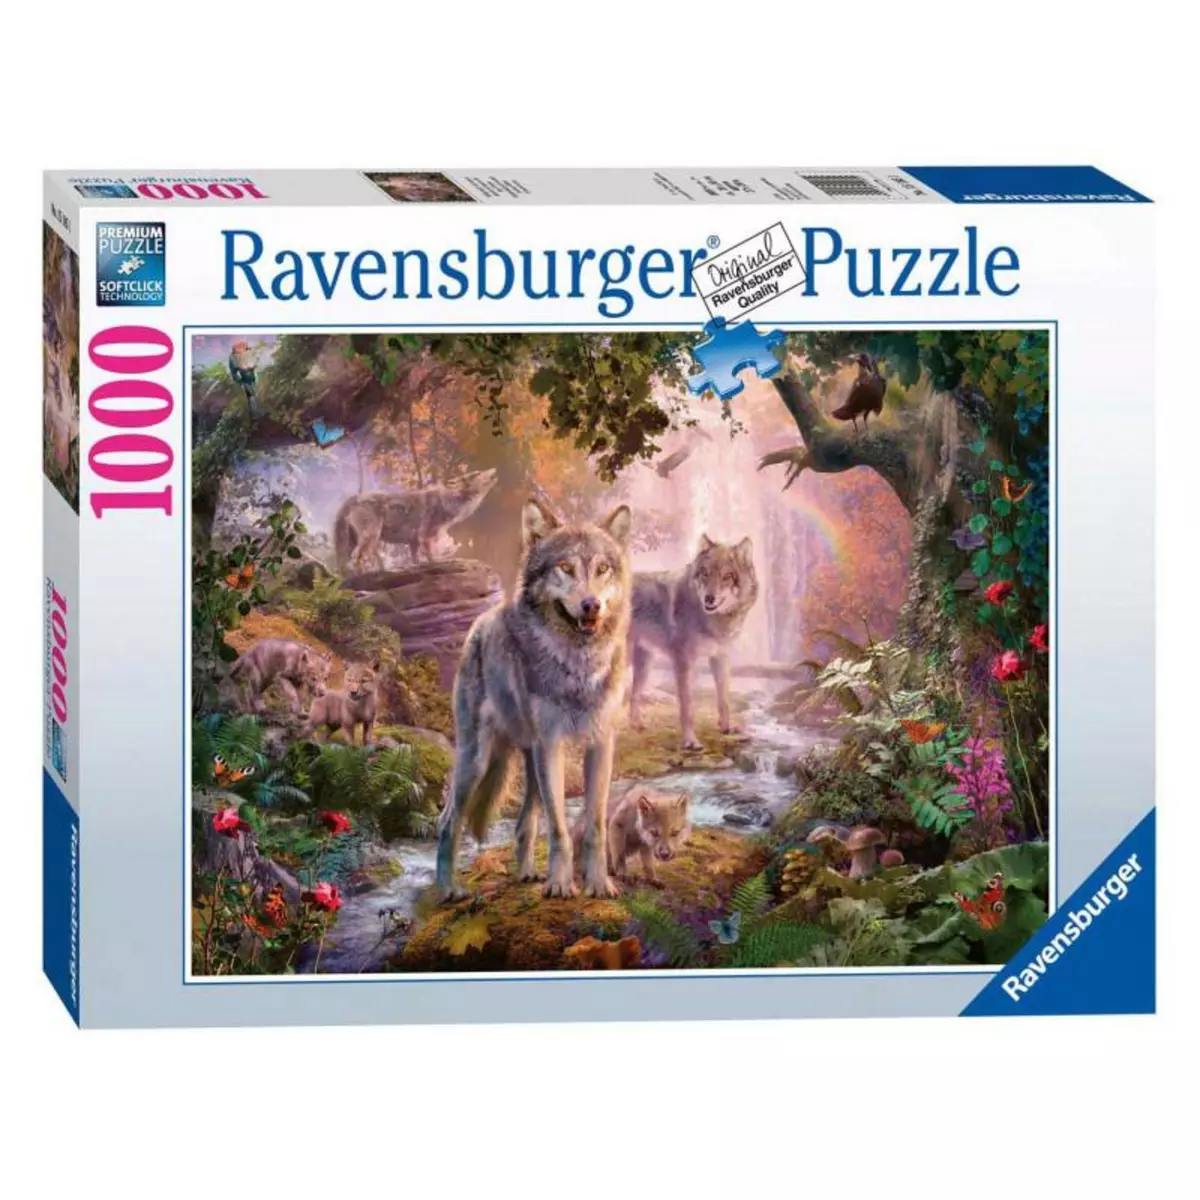 RAVENSBURGER Ravensburger Puzzle Wolf Family in Summer, 1000st. 151851